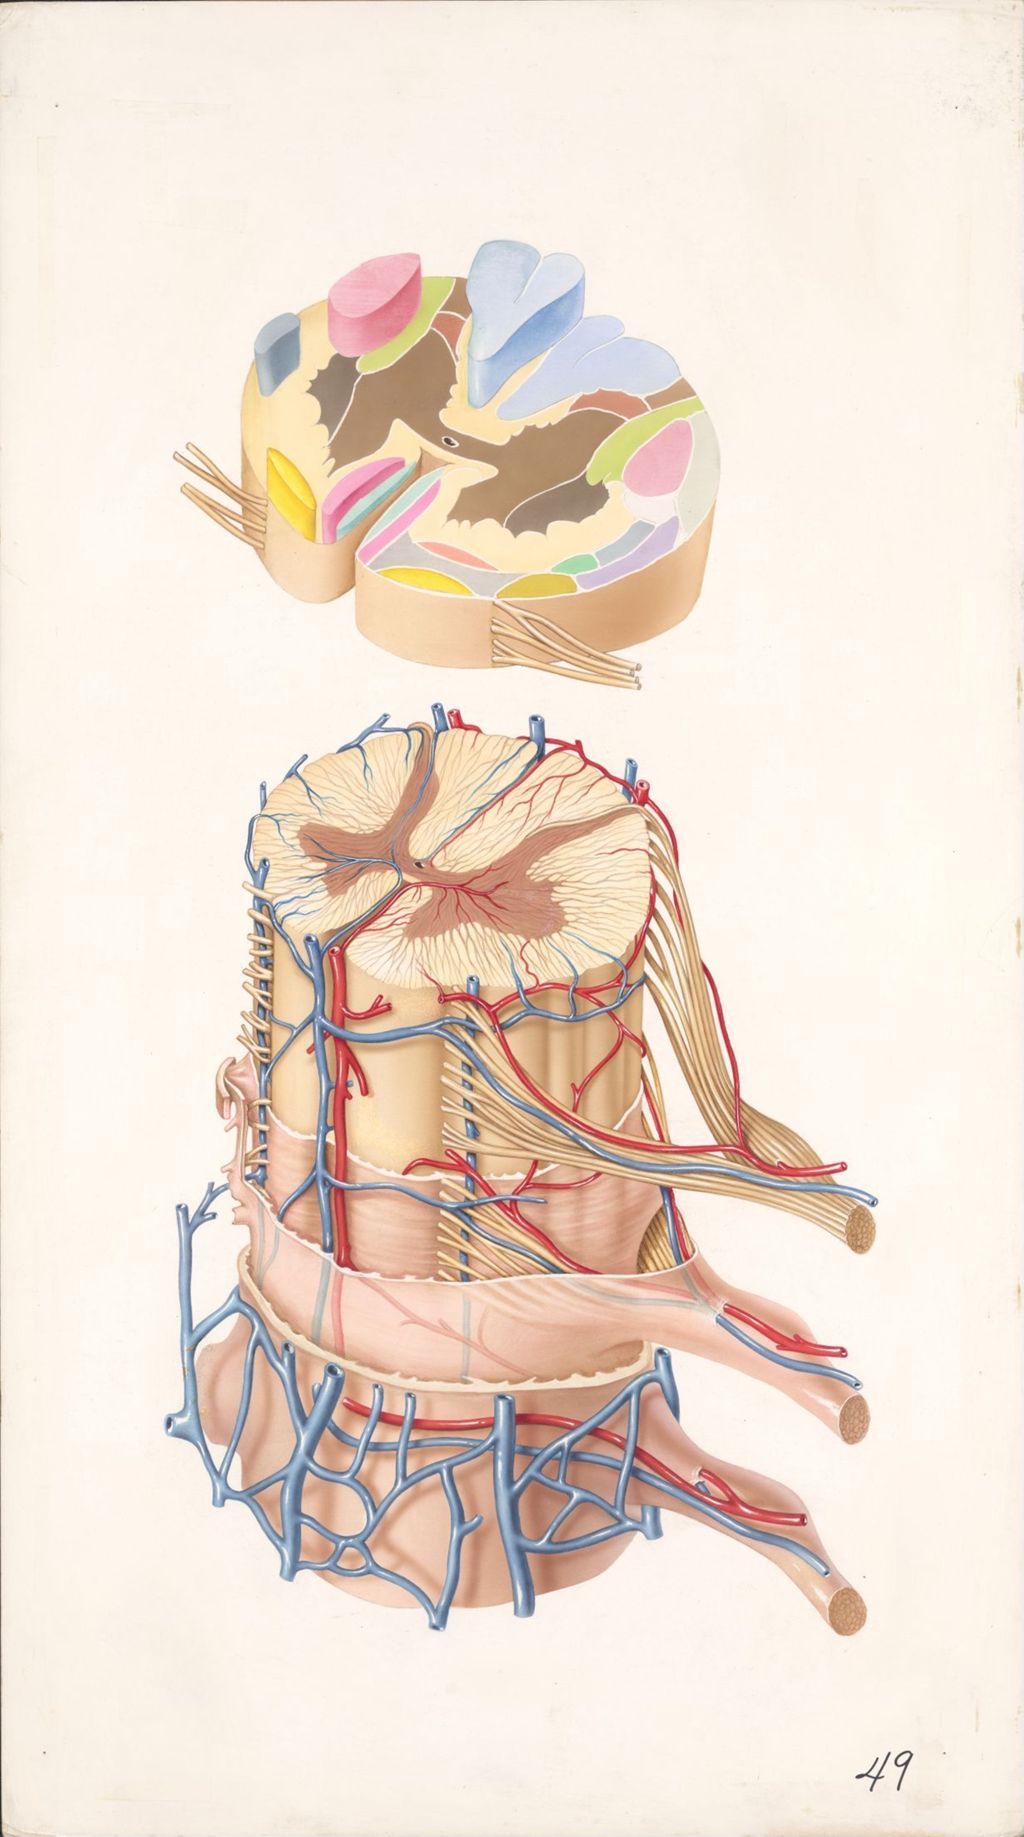 Miniature of Medical Profiles, Striatan, Important Nerve Tracts of the Spinal Cord and Anatomy of Spinal Cord